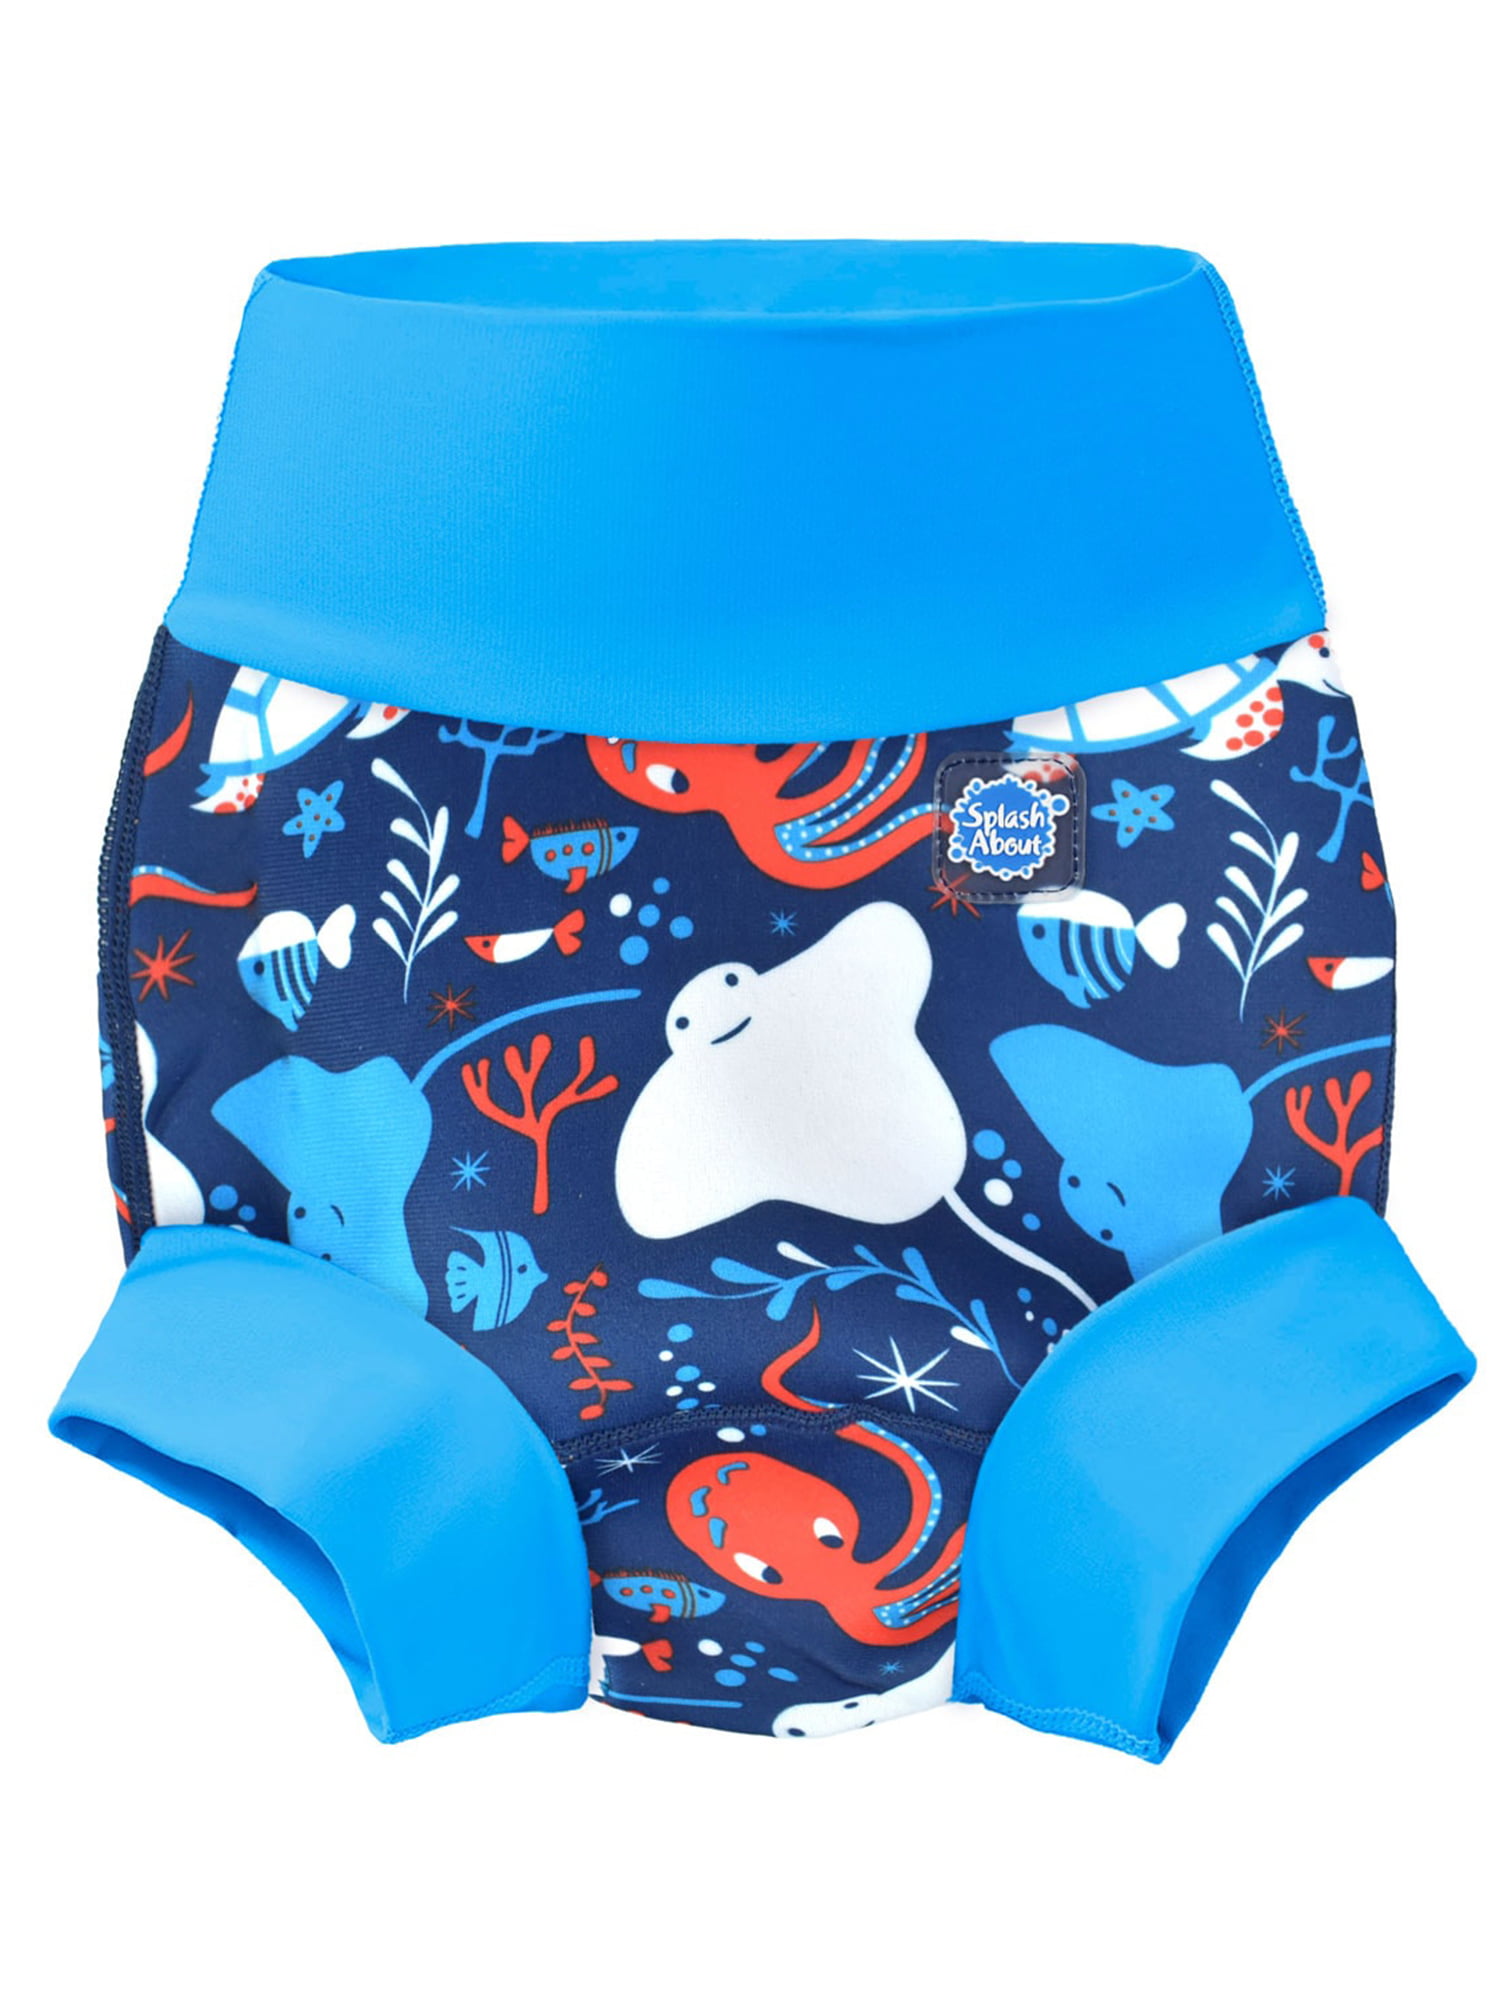 Owl and Pussycat Pattern Womens Swim Trunks 3D Printed Beach Board Shorts with Pockets for Teen Girls